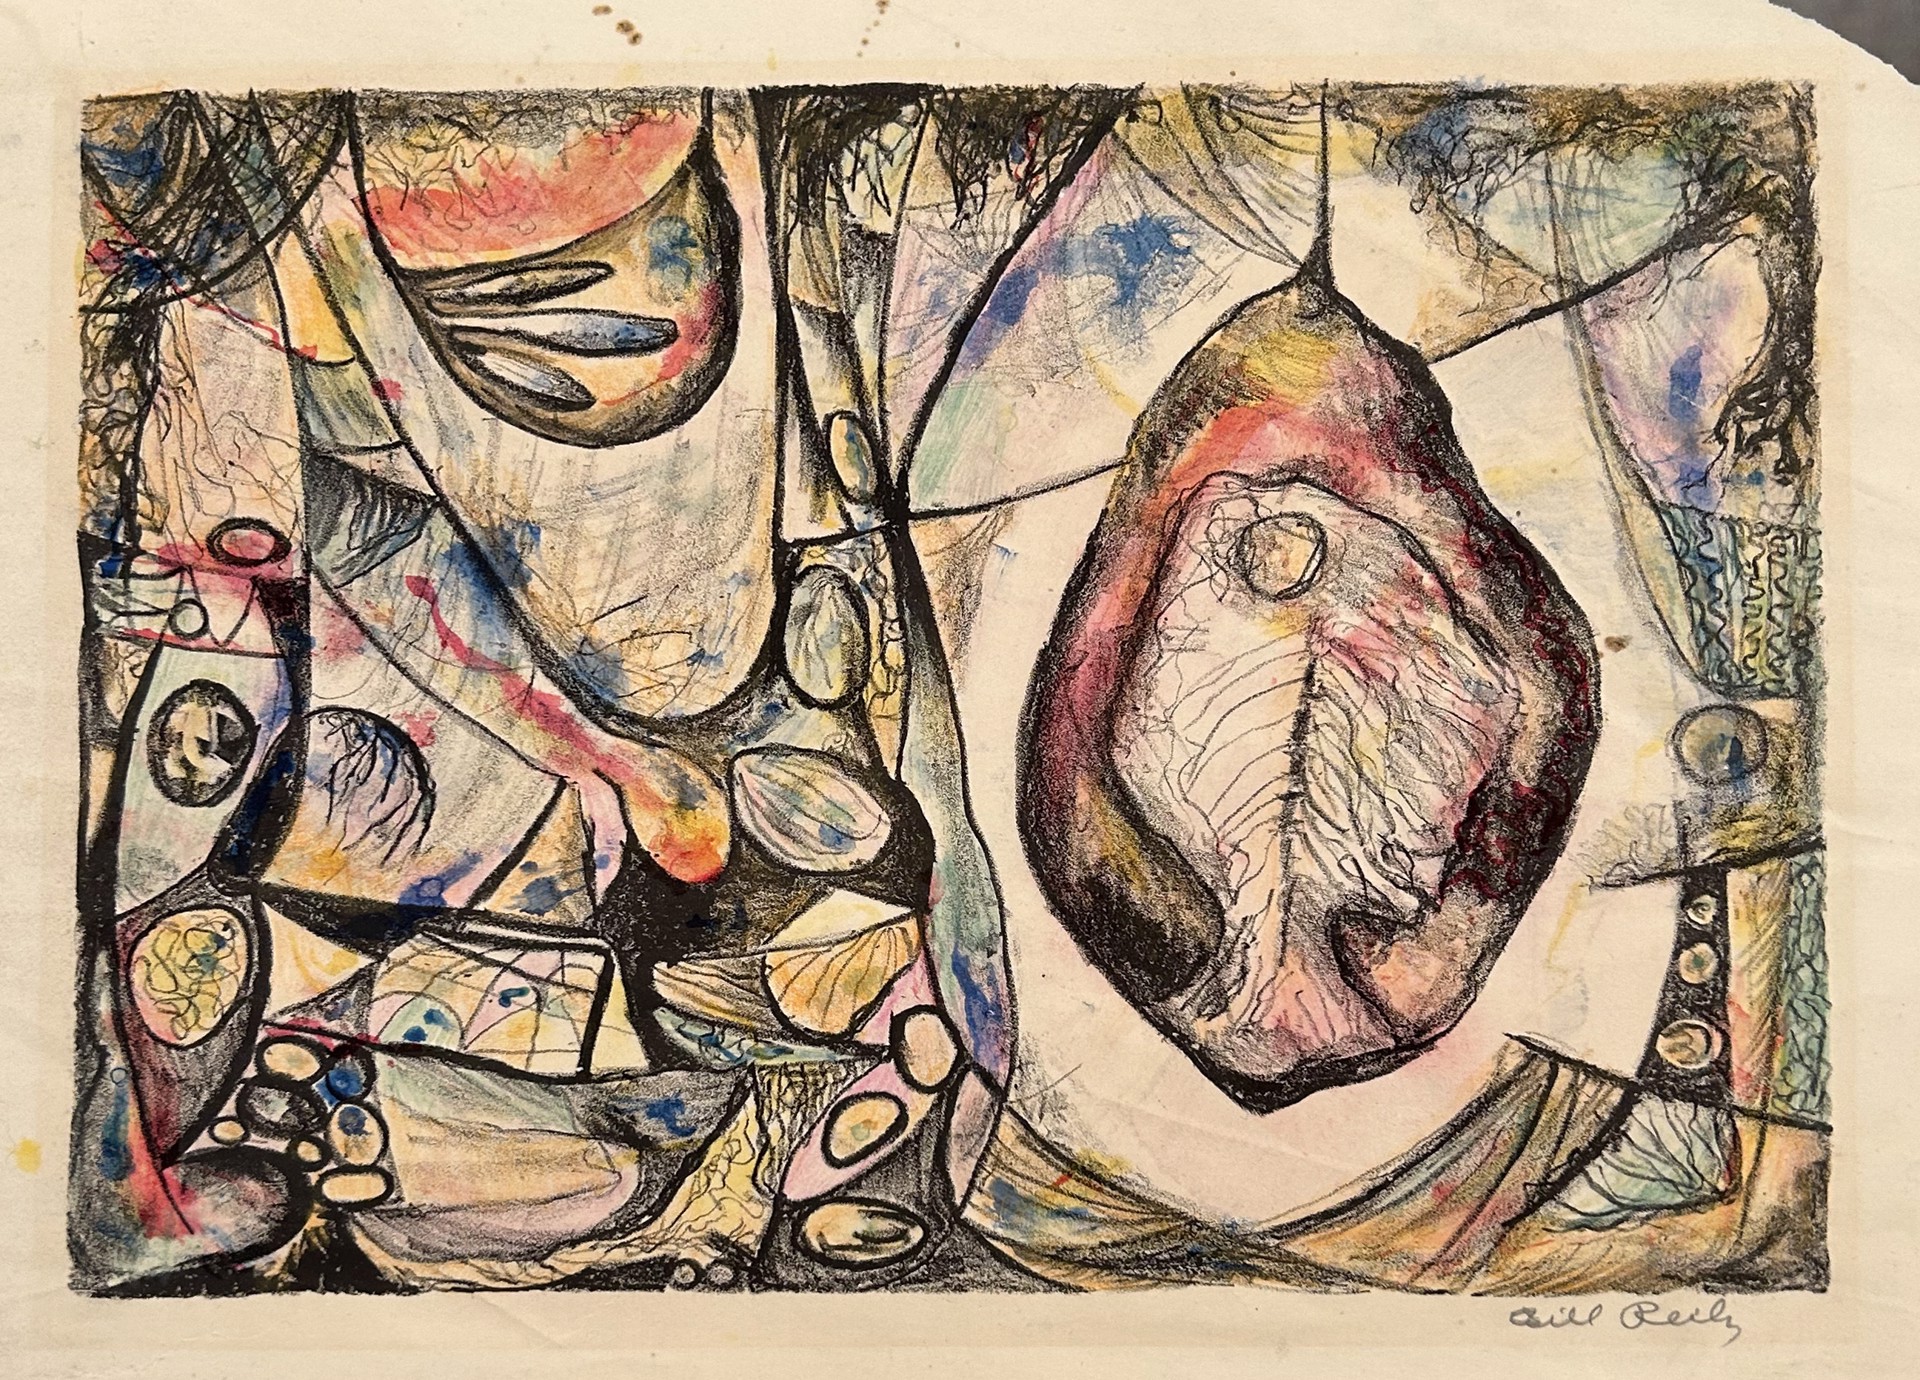 71. Untitled (hand colored) by Bill Reily Prints